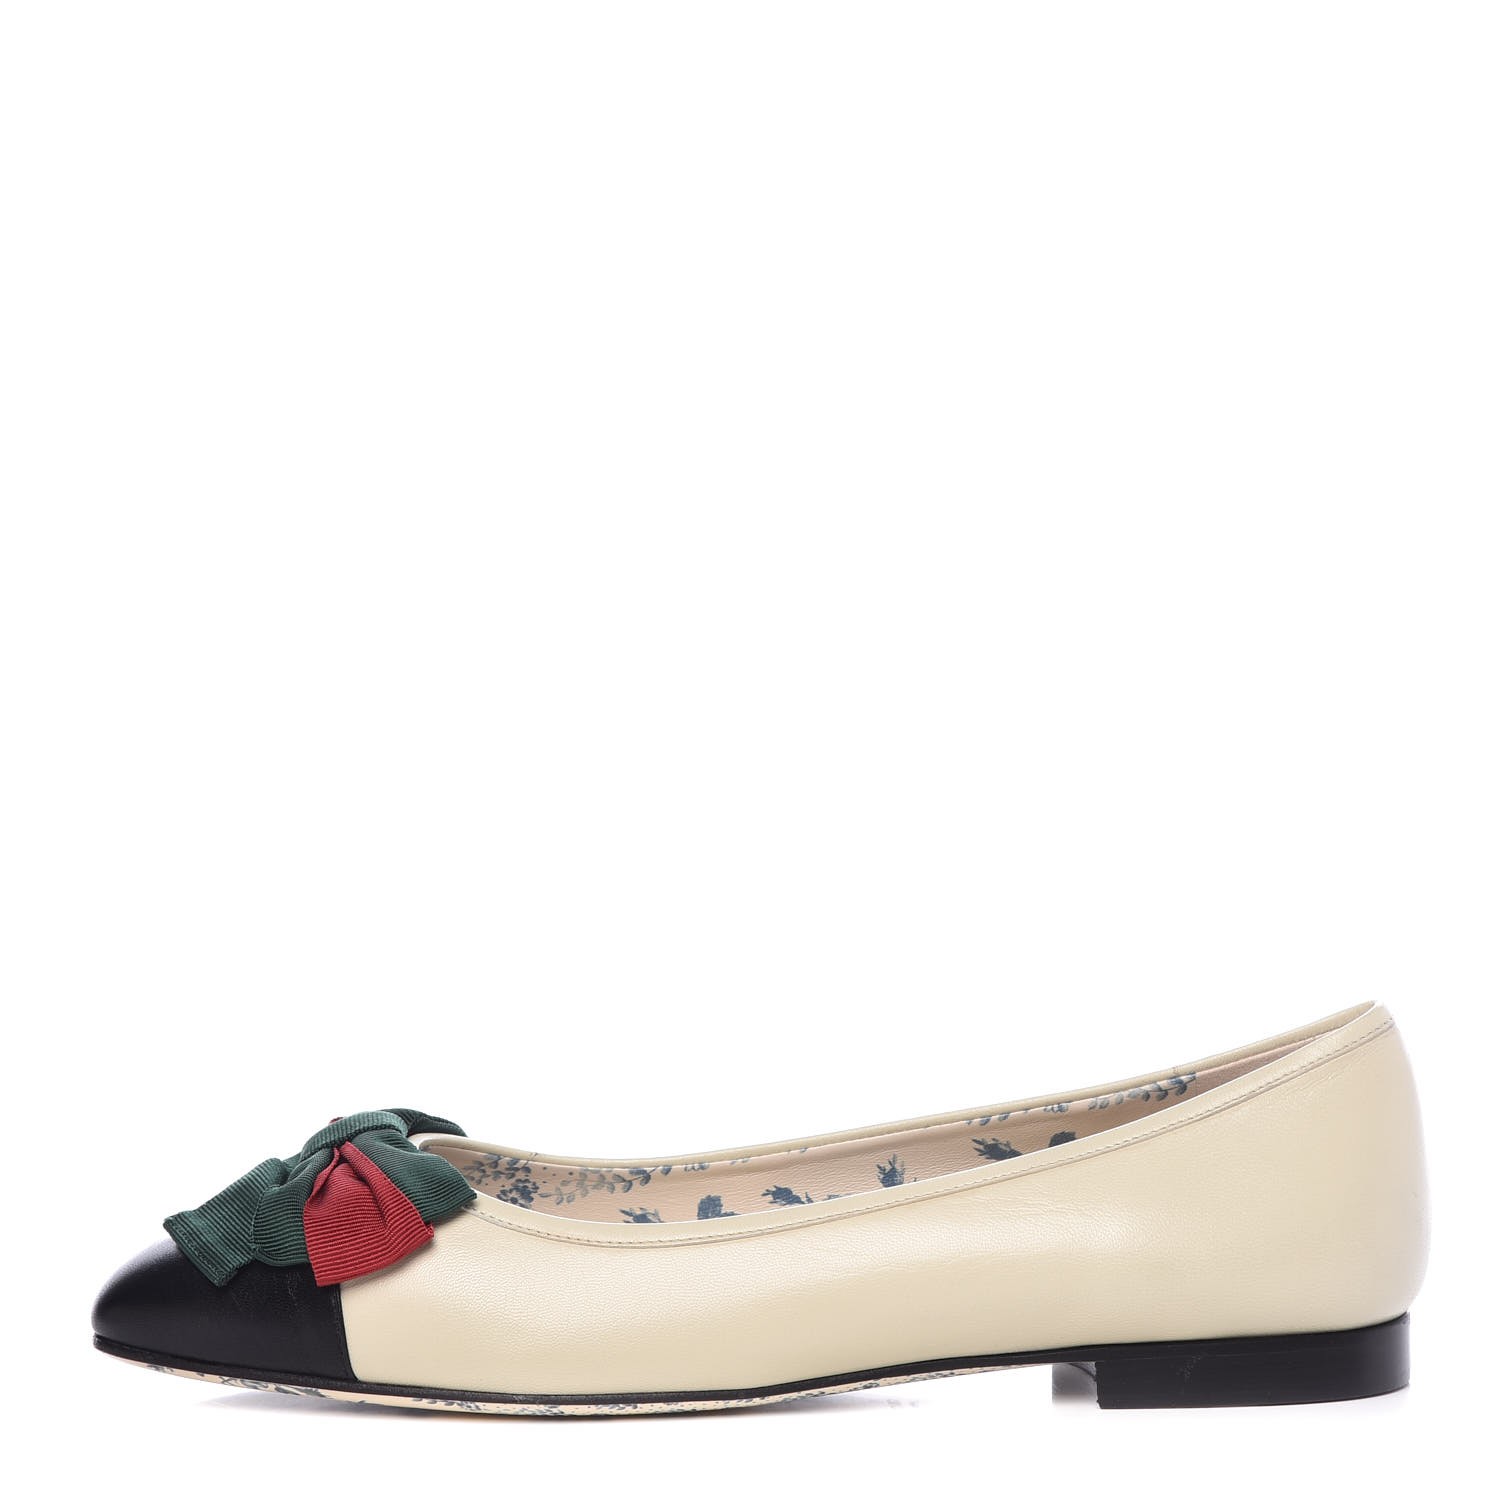 gucci suede ballet flat with web bow